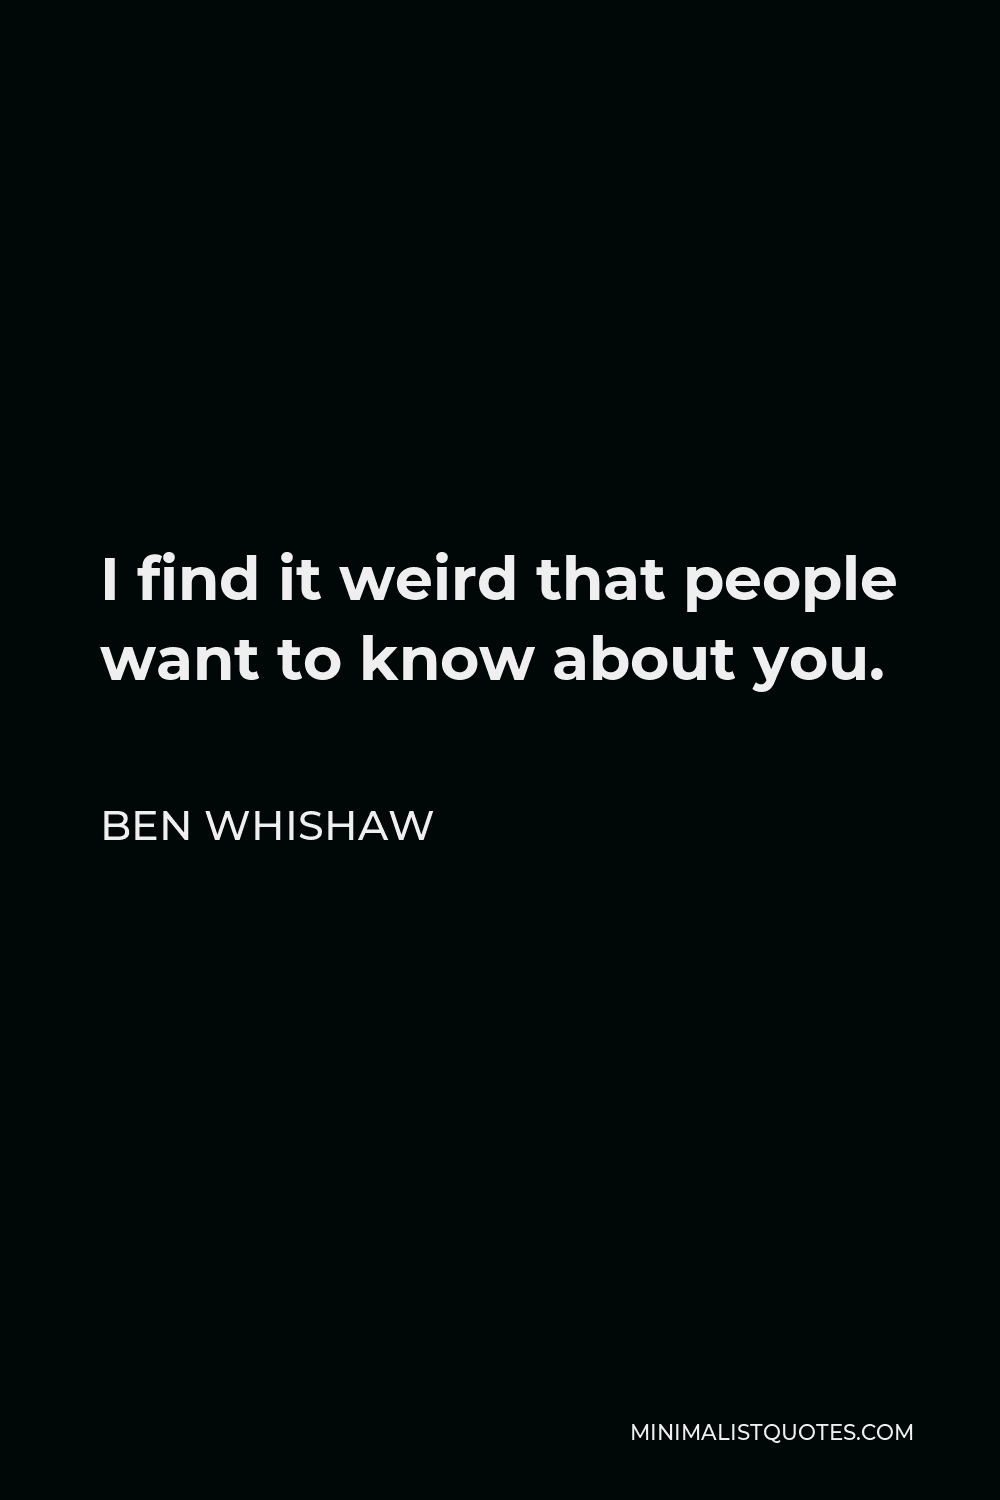 Ben Whishaw Quote - I find it weird that people want to know about you.